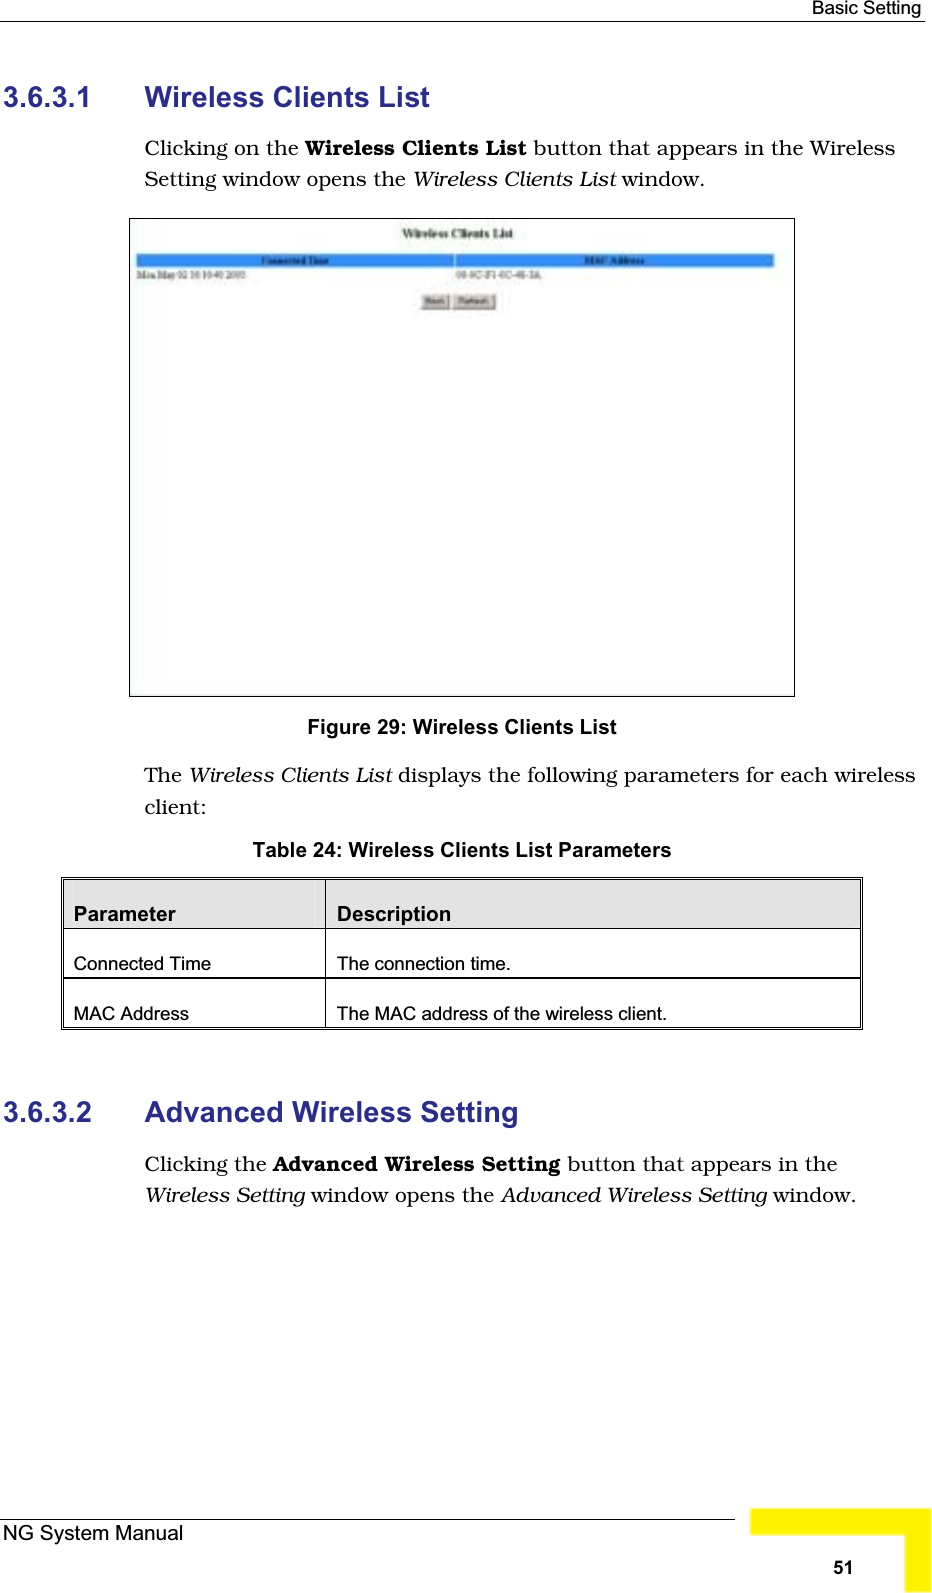 Basic Setting 3.6.3.1 Wireless Clients List Clicking on the Wireless Clients List button that appears in the WirelessSetting window opens the Wireless Clients List window.Figure 29: Wireless Clients List The Wireless Clients List displays the following parameters for each wirelessclient:Table 24: Wireless Clients List ParametersParameter DescriptionConnected Time The connection time. MAC Address  The MAC address of the wireless client.3.6.3.2 Advanced Wireless SettingClicking the Advanced Wireless Setting button that appears in theWireless Setting window opens the Advanced Wireless Setting window.NG System Manual51